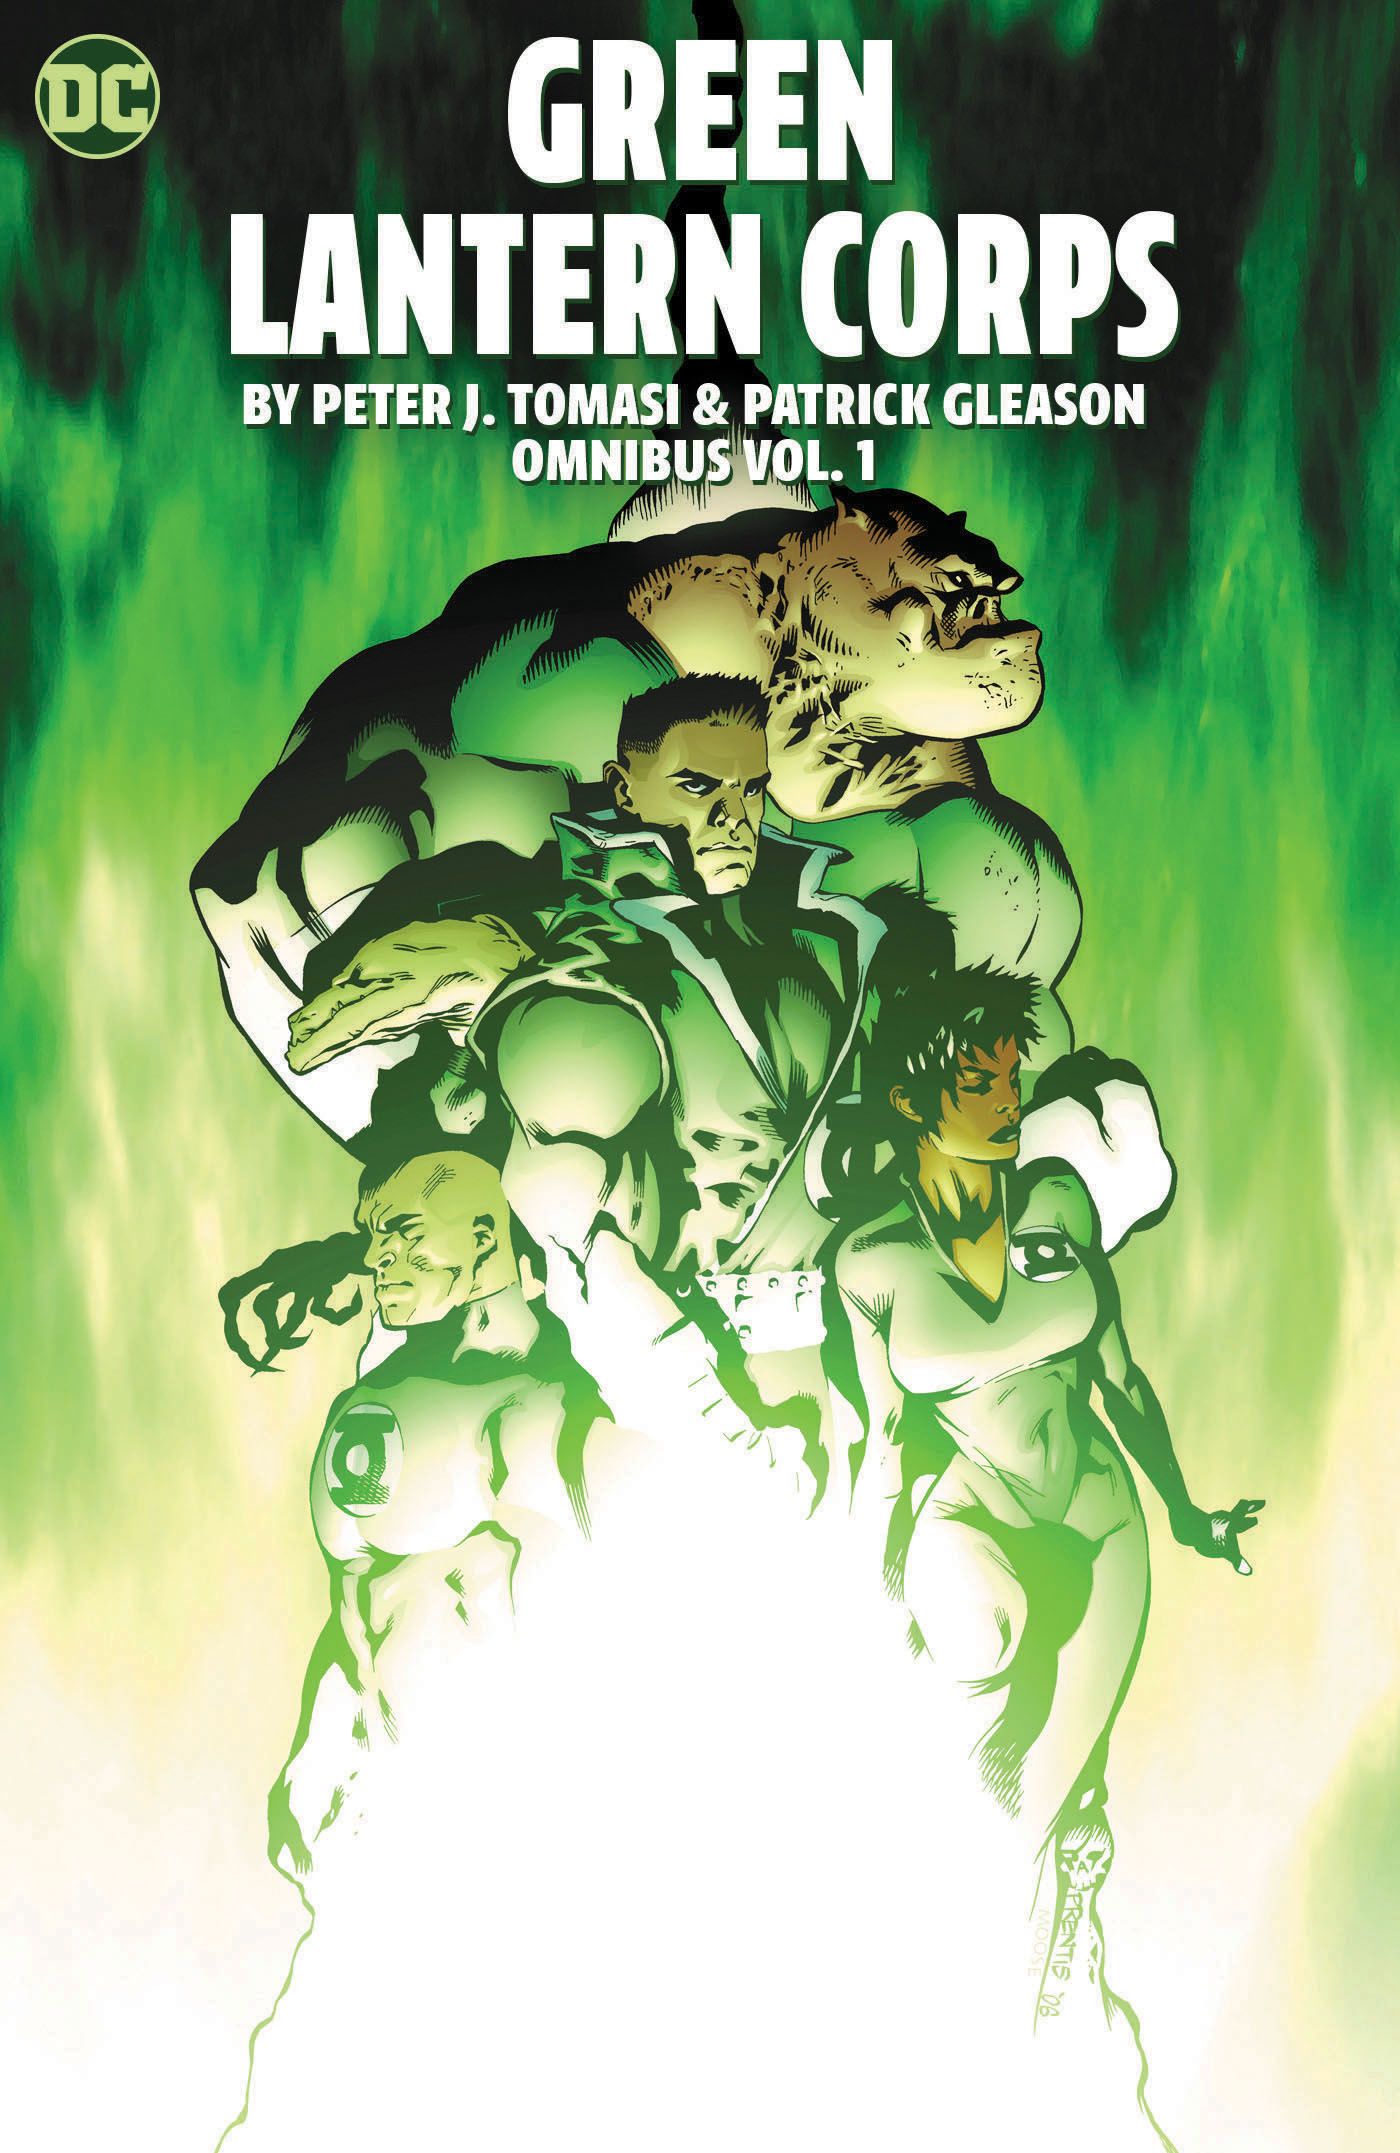 Green Lantern Corps by Peter J Tomasi and Patrick Gleason Omnibus Vol 1